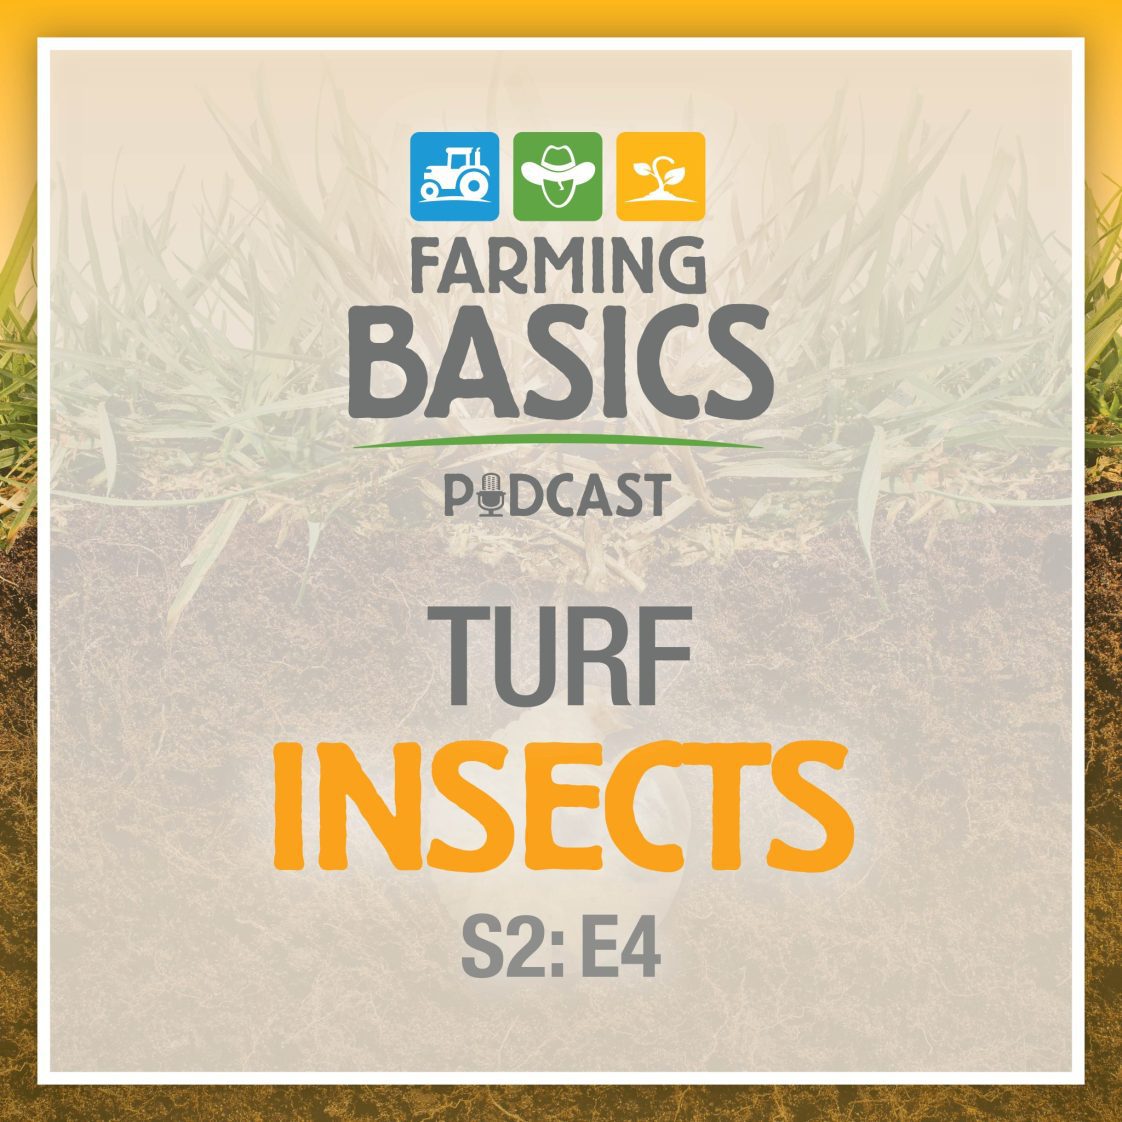 Farming Basics Podcast- Turf Insects